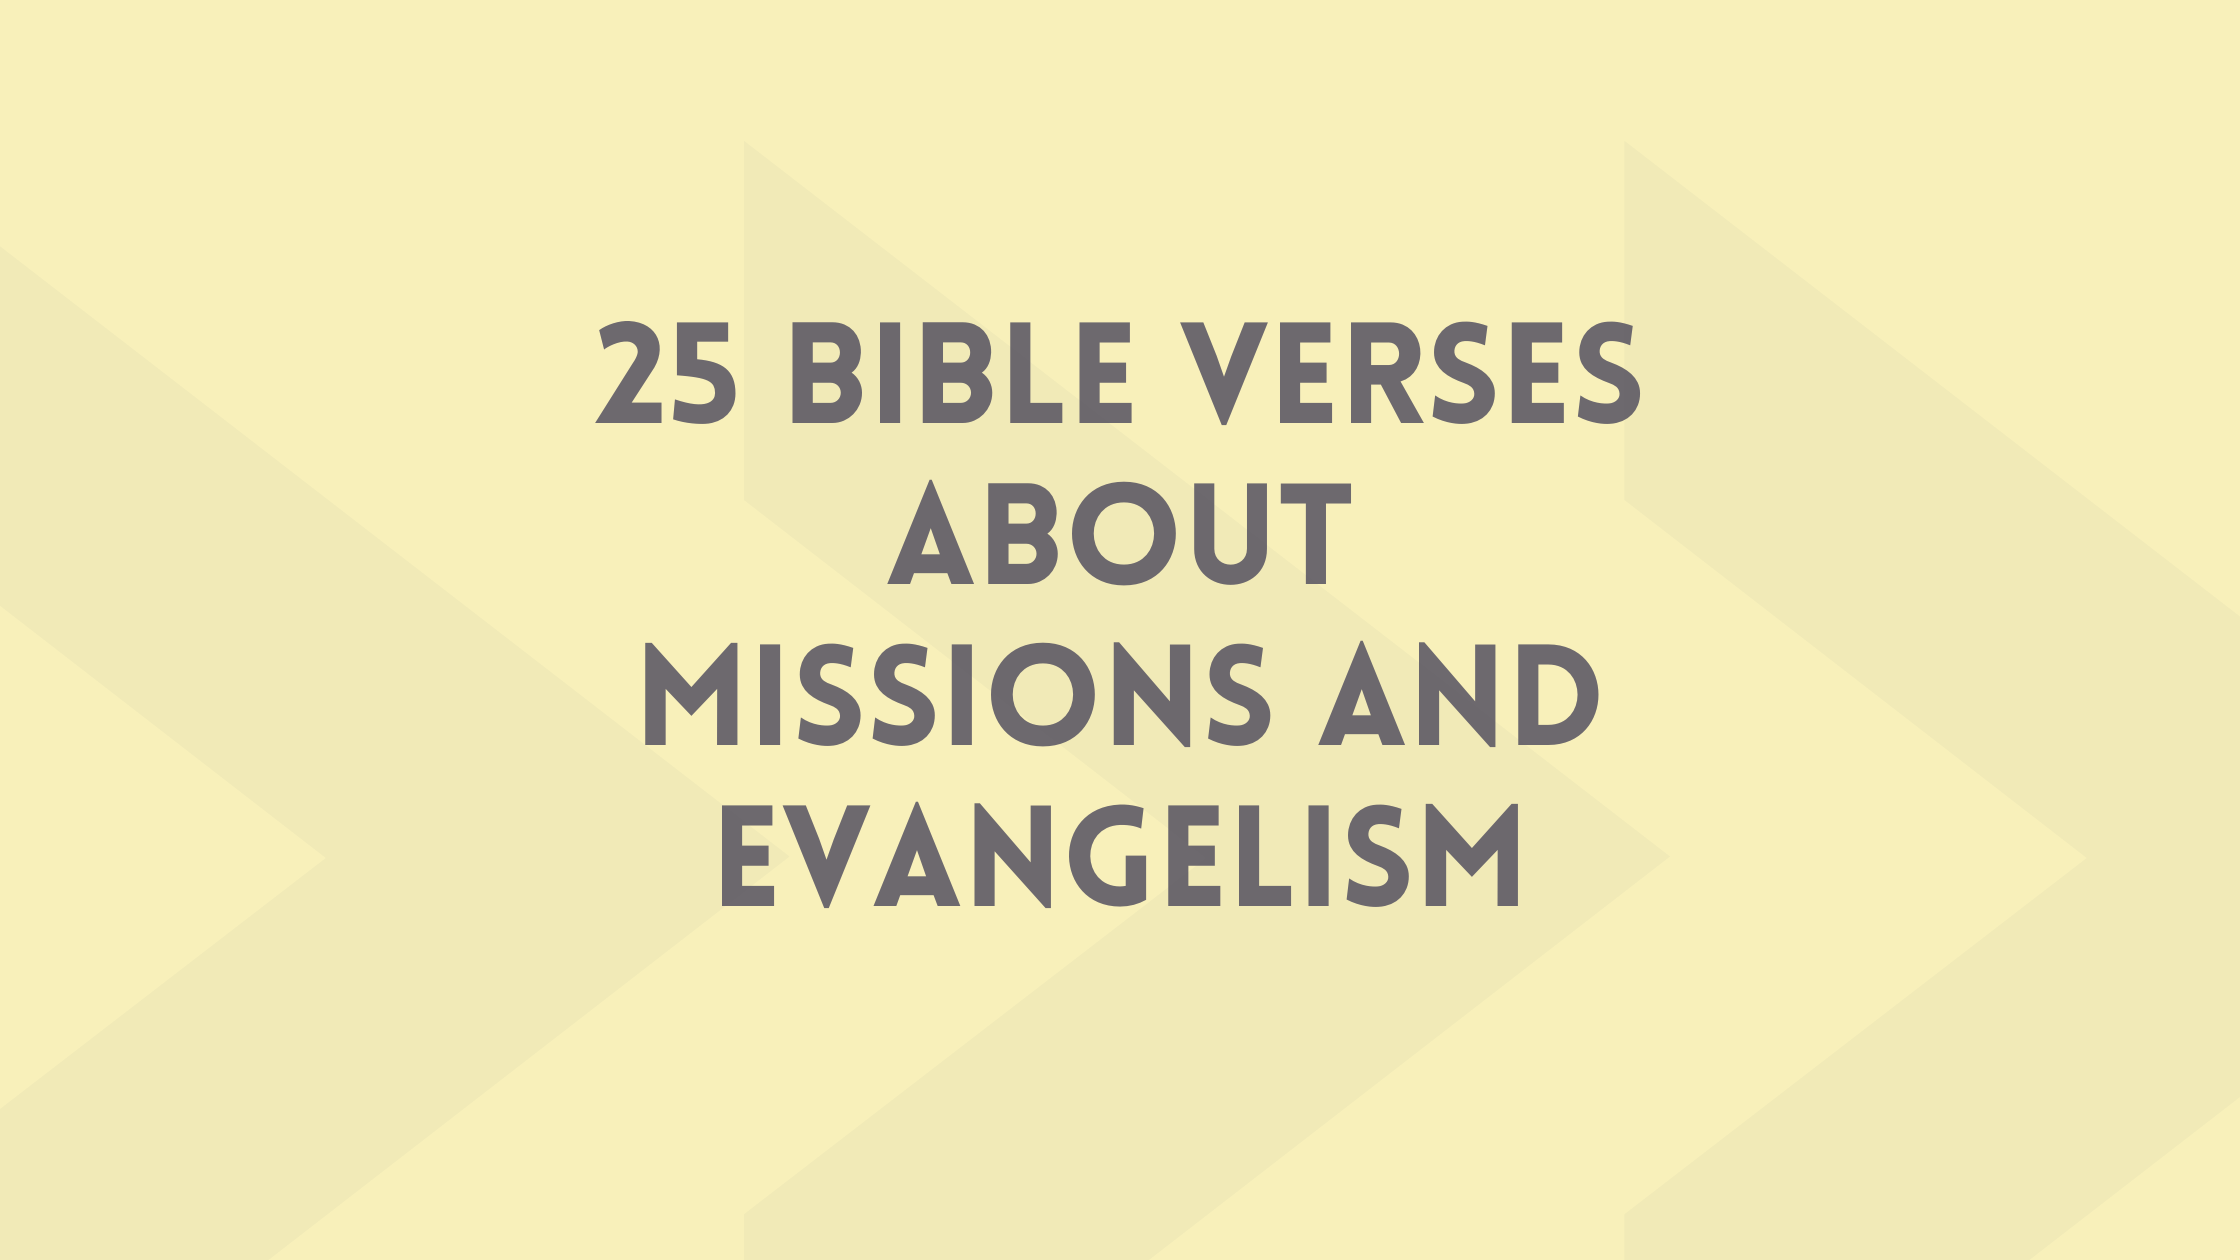 Bible Verses About Missions and Evangelism